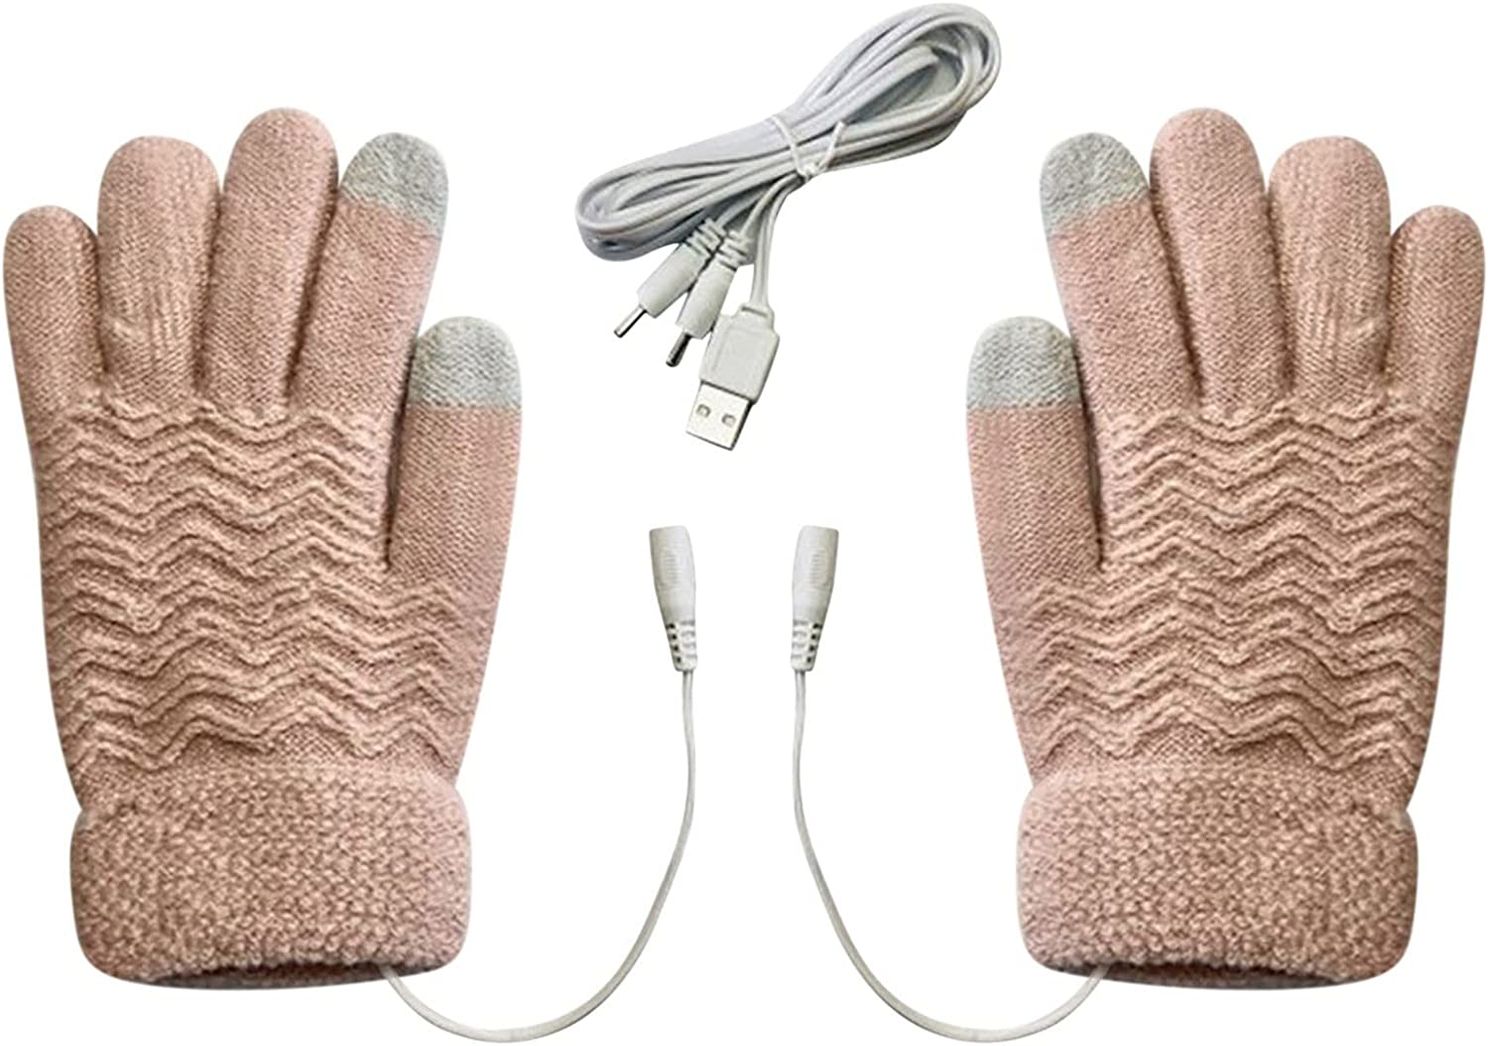 8 handy gadgets that keep the cold out